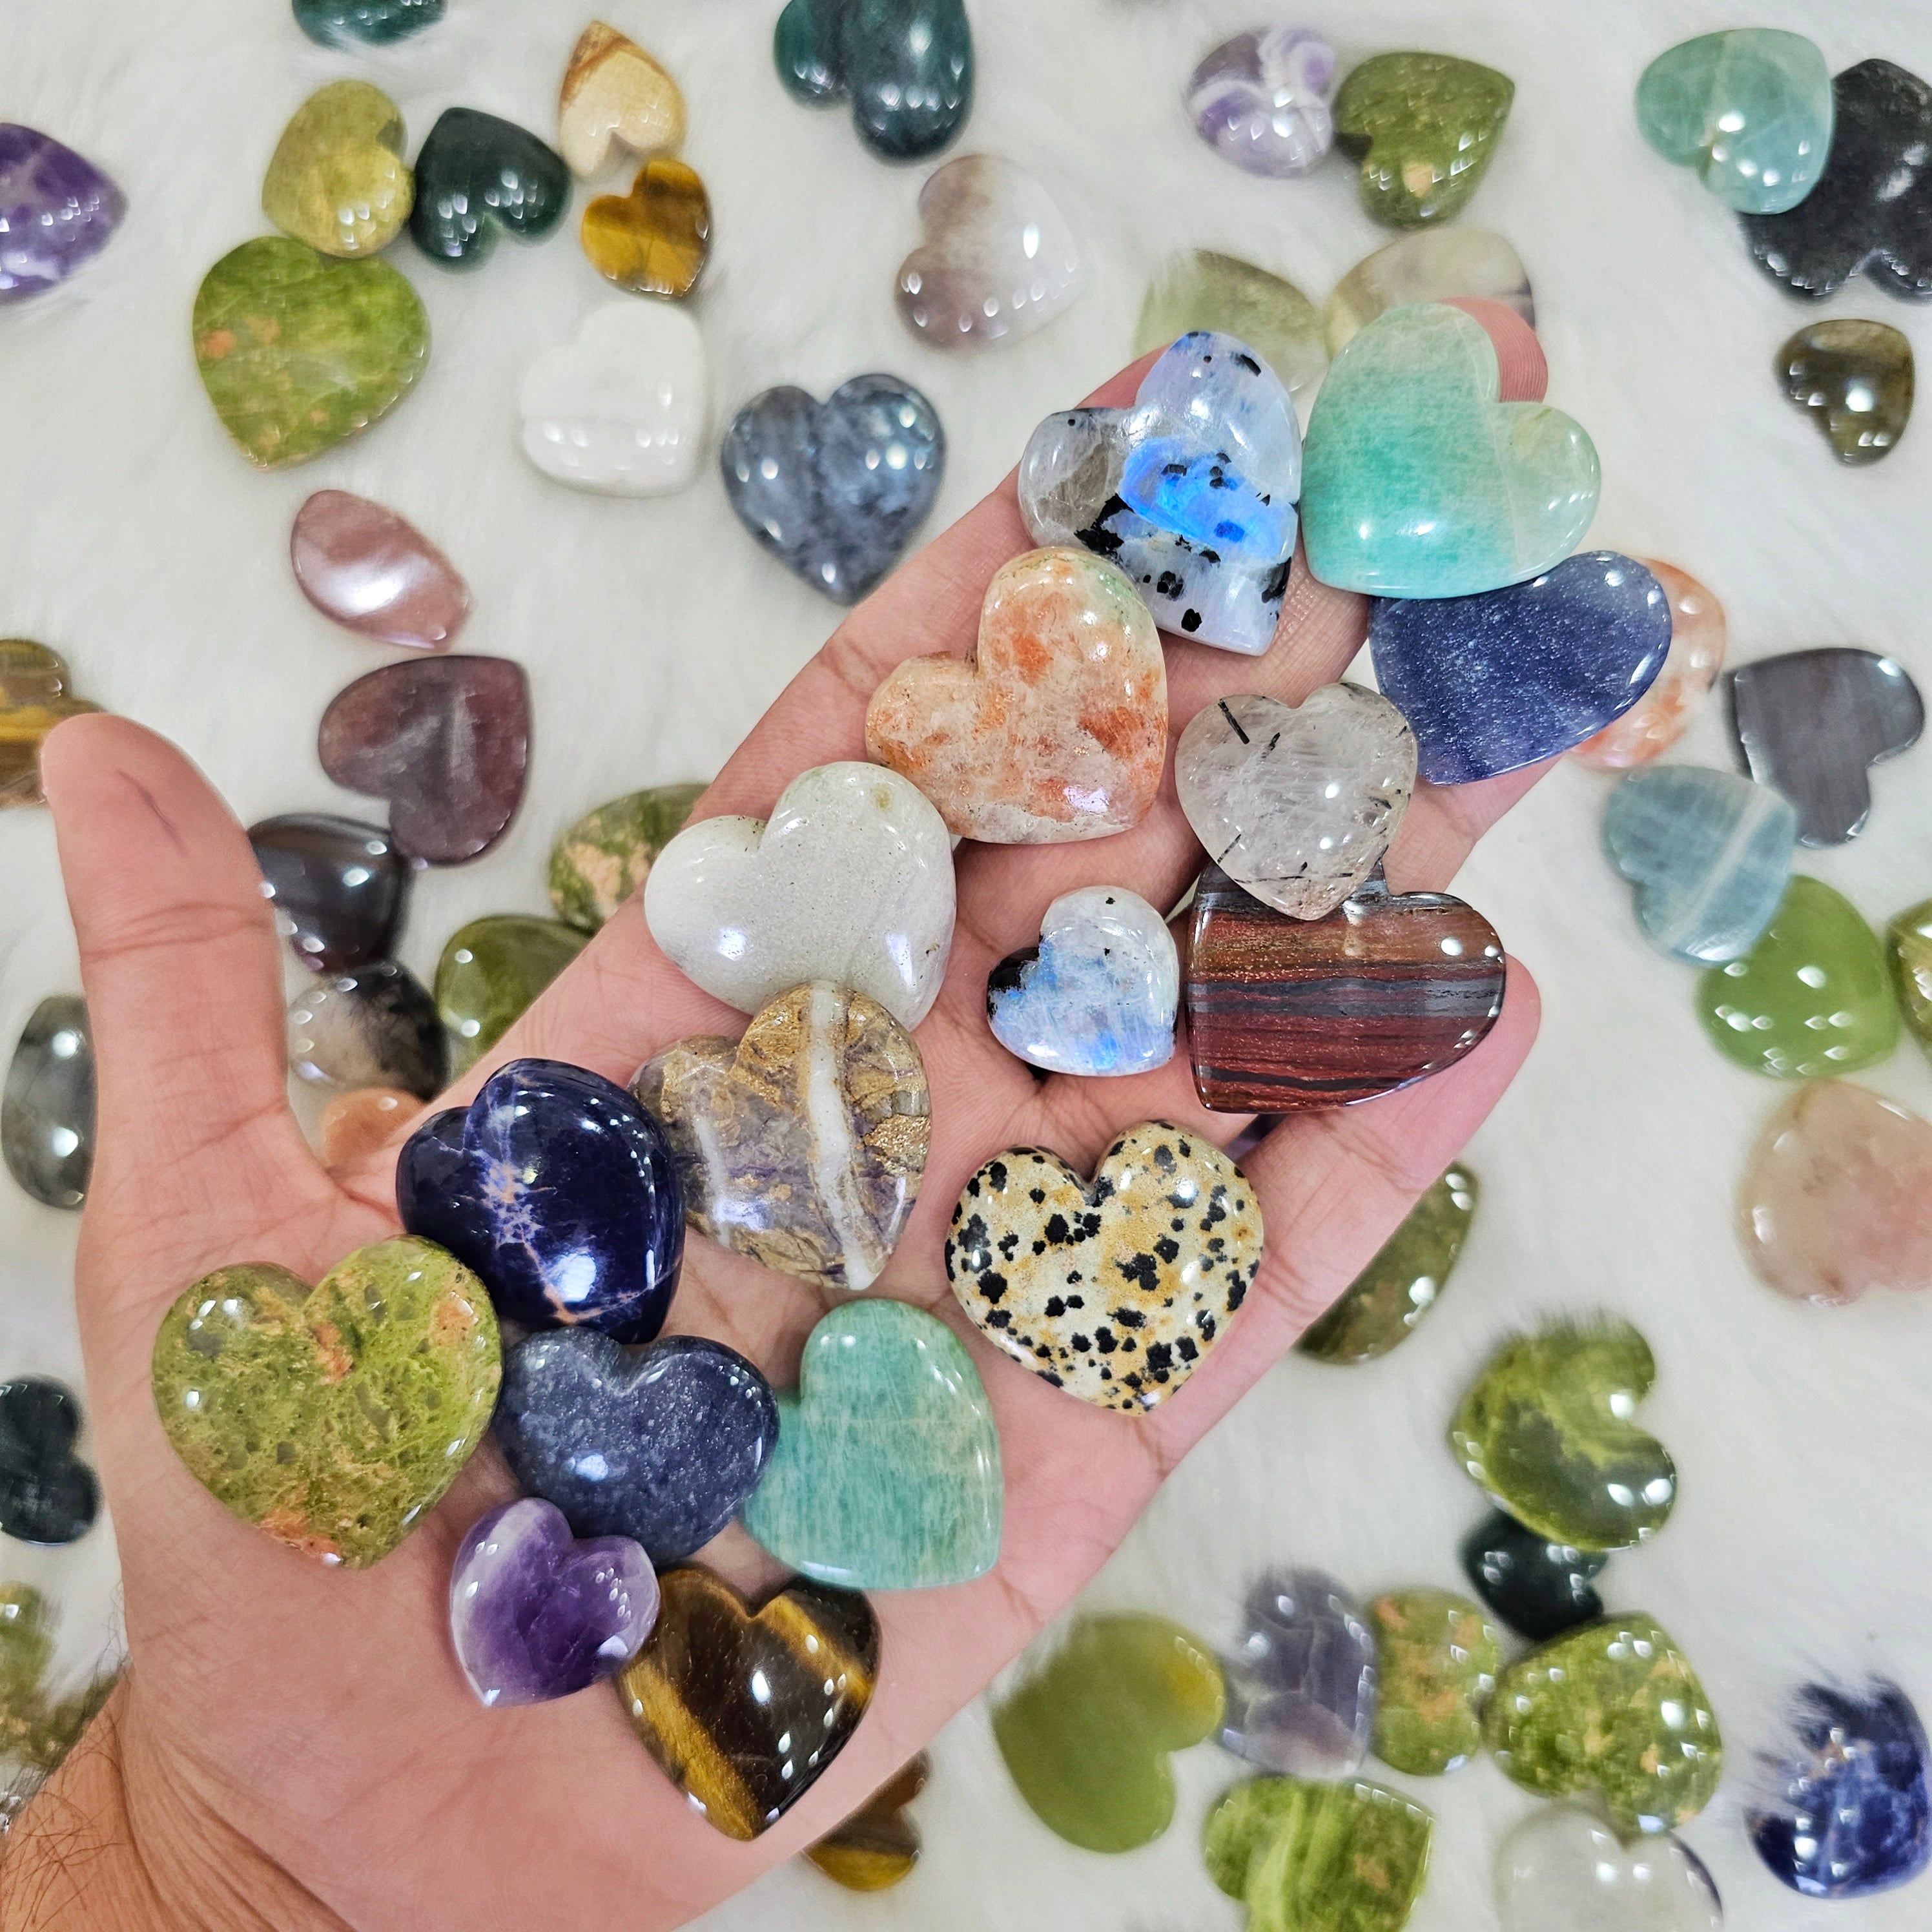 50 Pcs assortment of Crystal Hearts | 1"Inches - 2" Inches | High Polished hearts - The LabradoriteKing